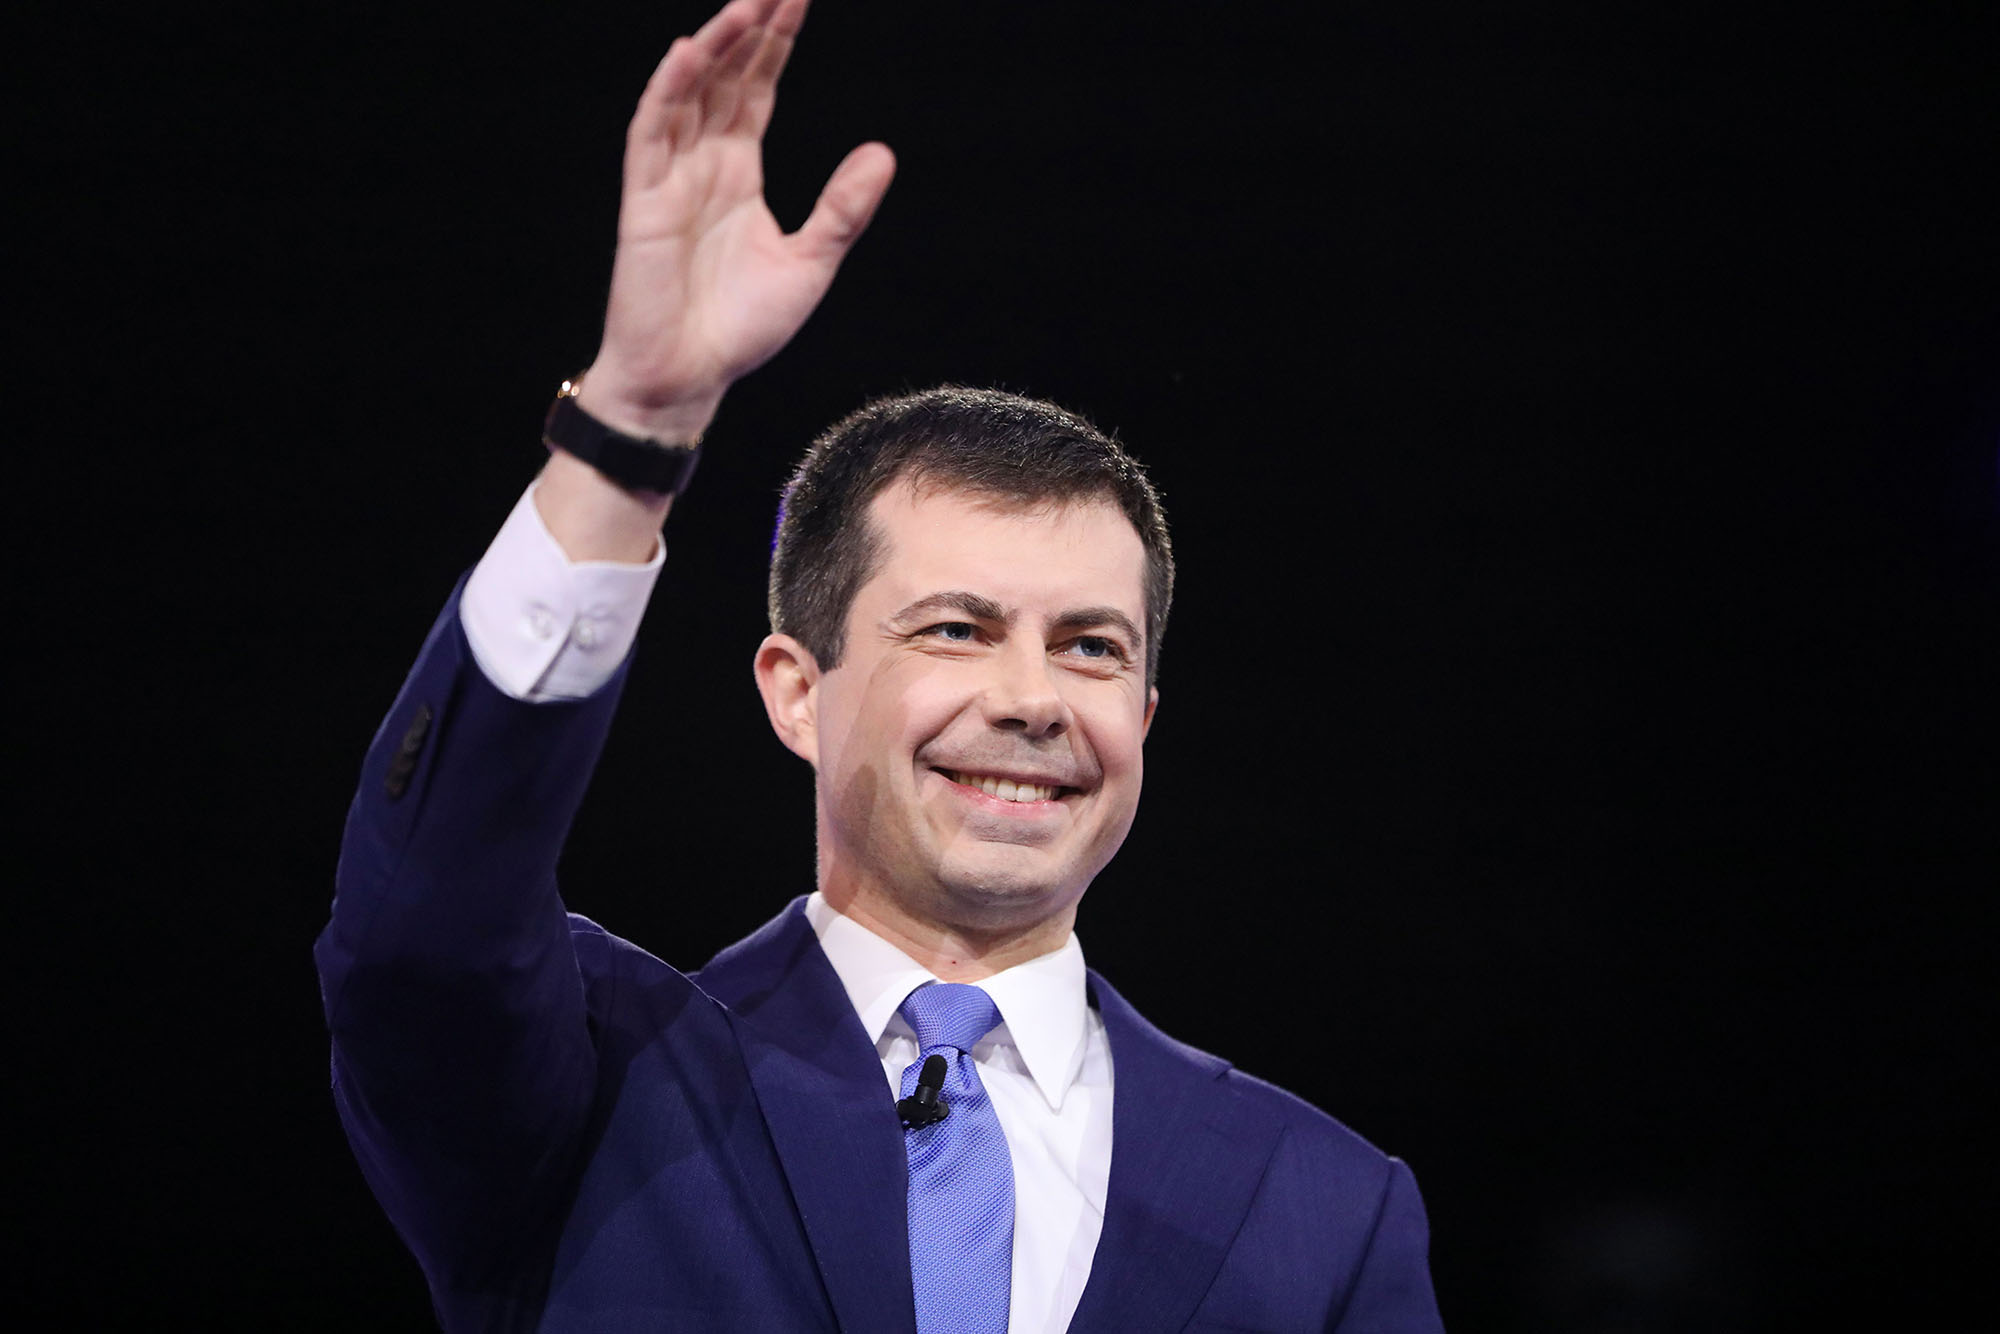 Former Democratic presidential candidate Pete Buttigieg waves as he arrived for the tenth Democratic primary debate at the Gaillard Center in Charleston, South Carolina, on February 25, 2020. 